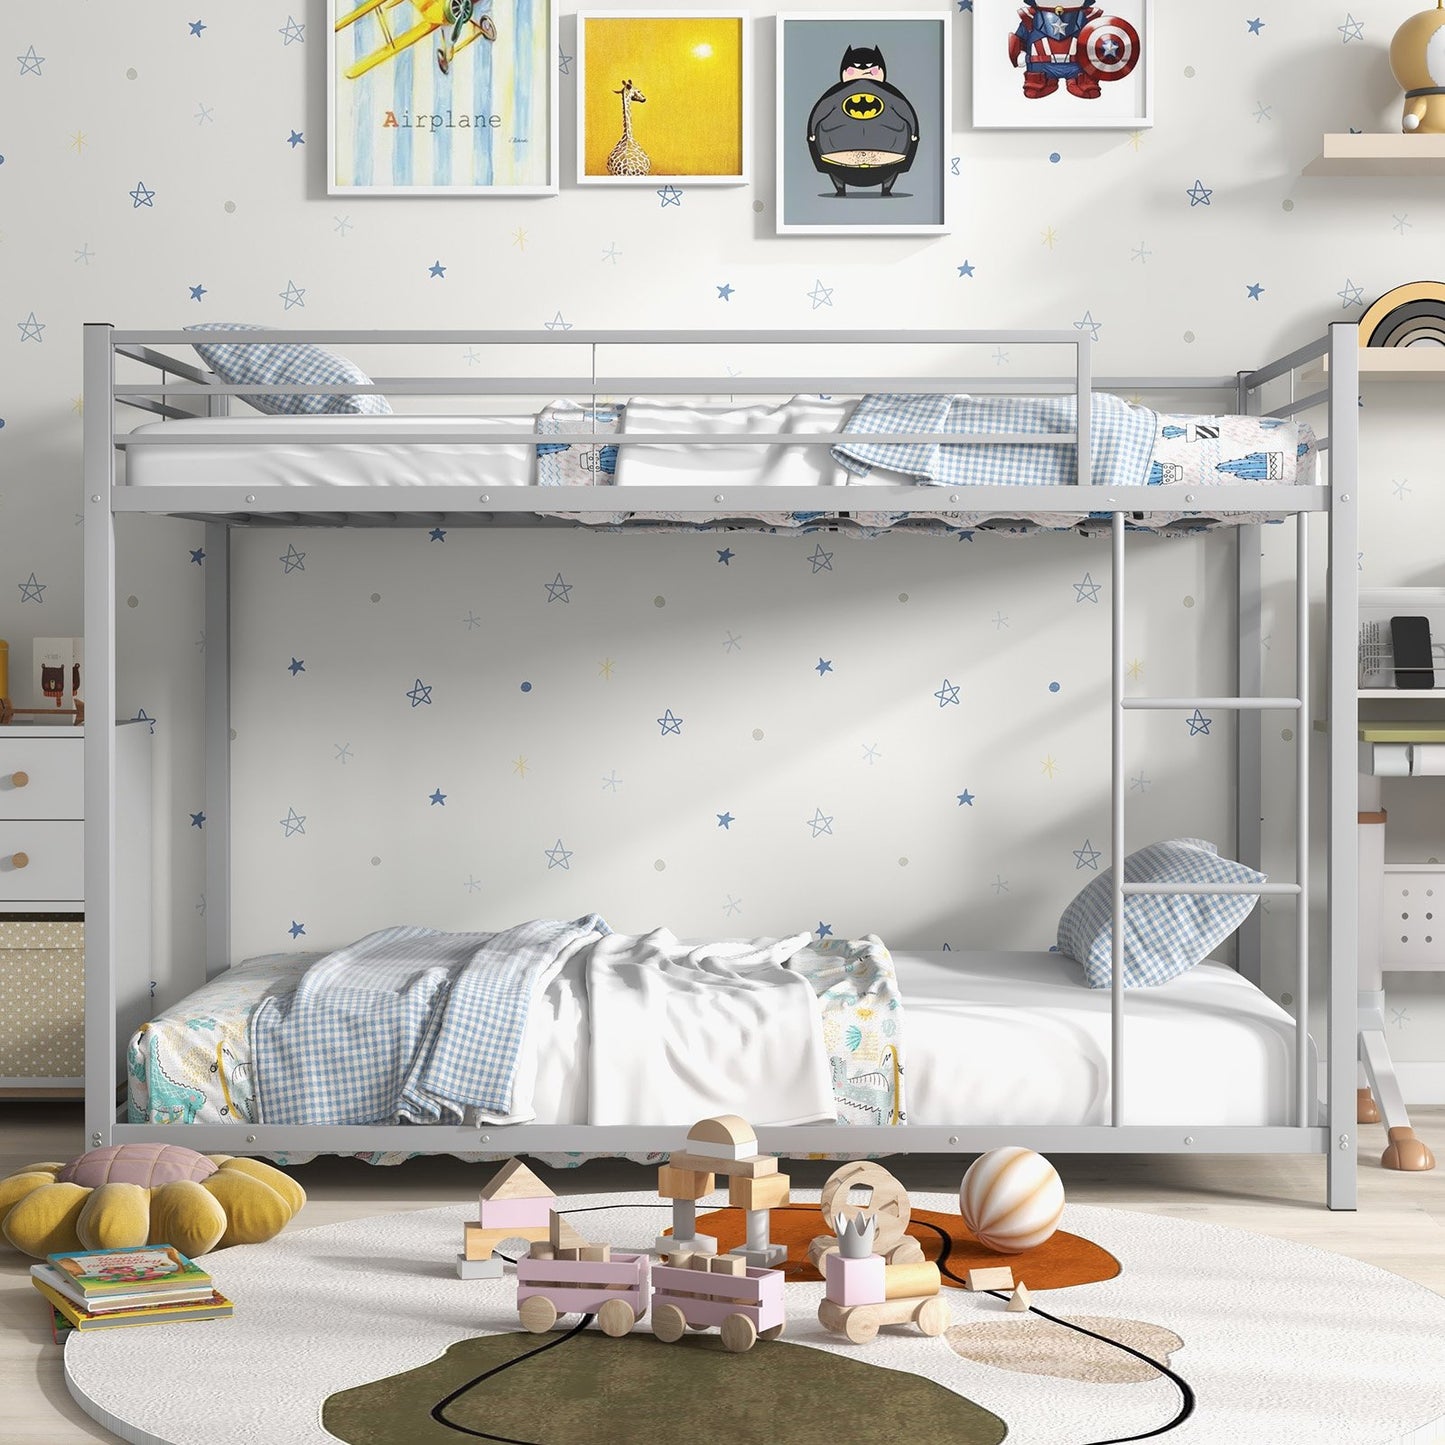 Low Profile Twin Over Twin Metal Bunk Bed with Full-length Guardrails, Silver